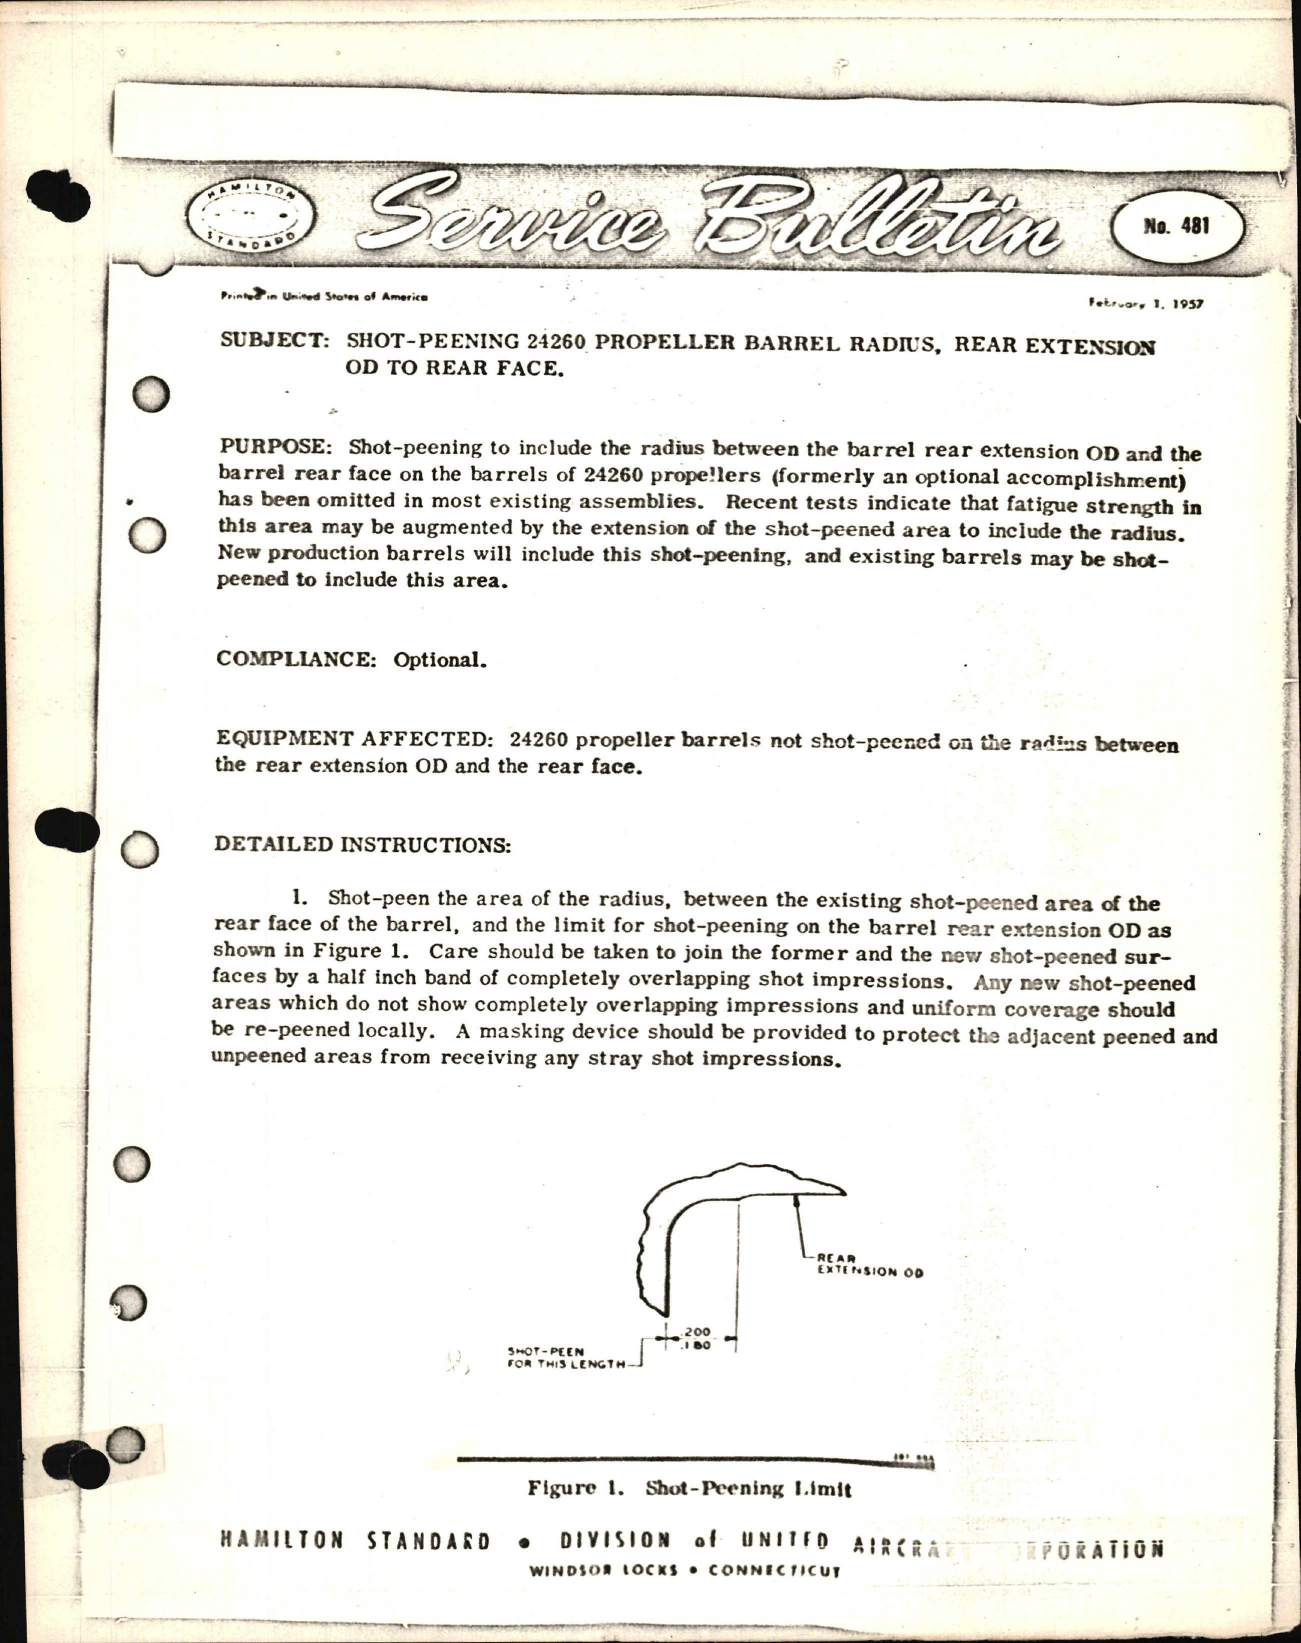 Sample page 1 from AirCorps Library document: Shot-Peening 24260 Propeller Barrel Radius, Rear Extension OD to Rear Face